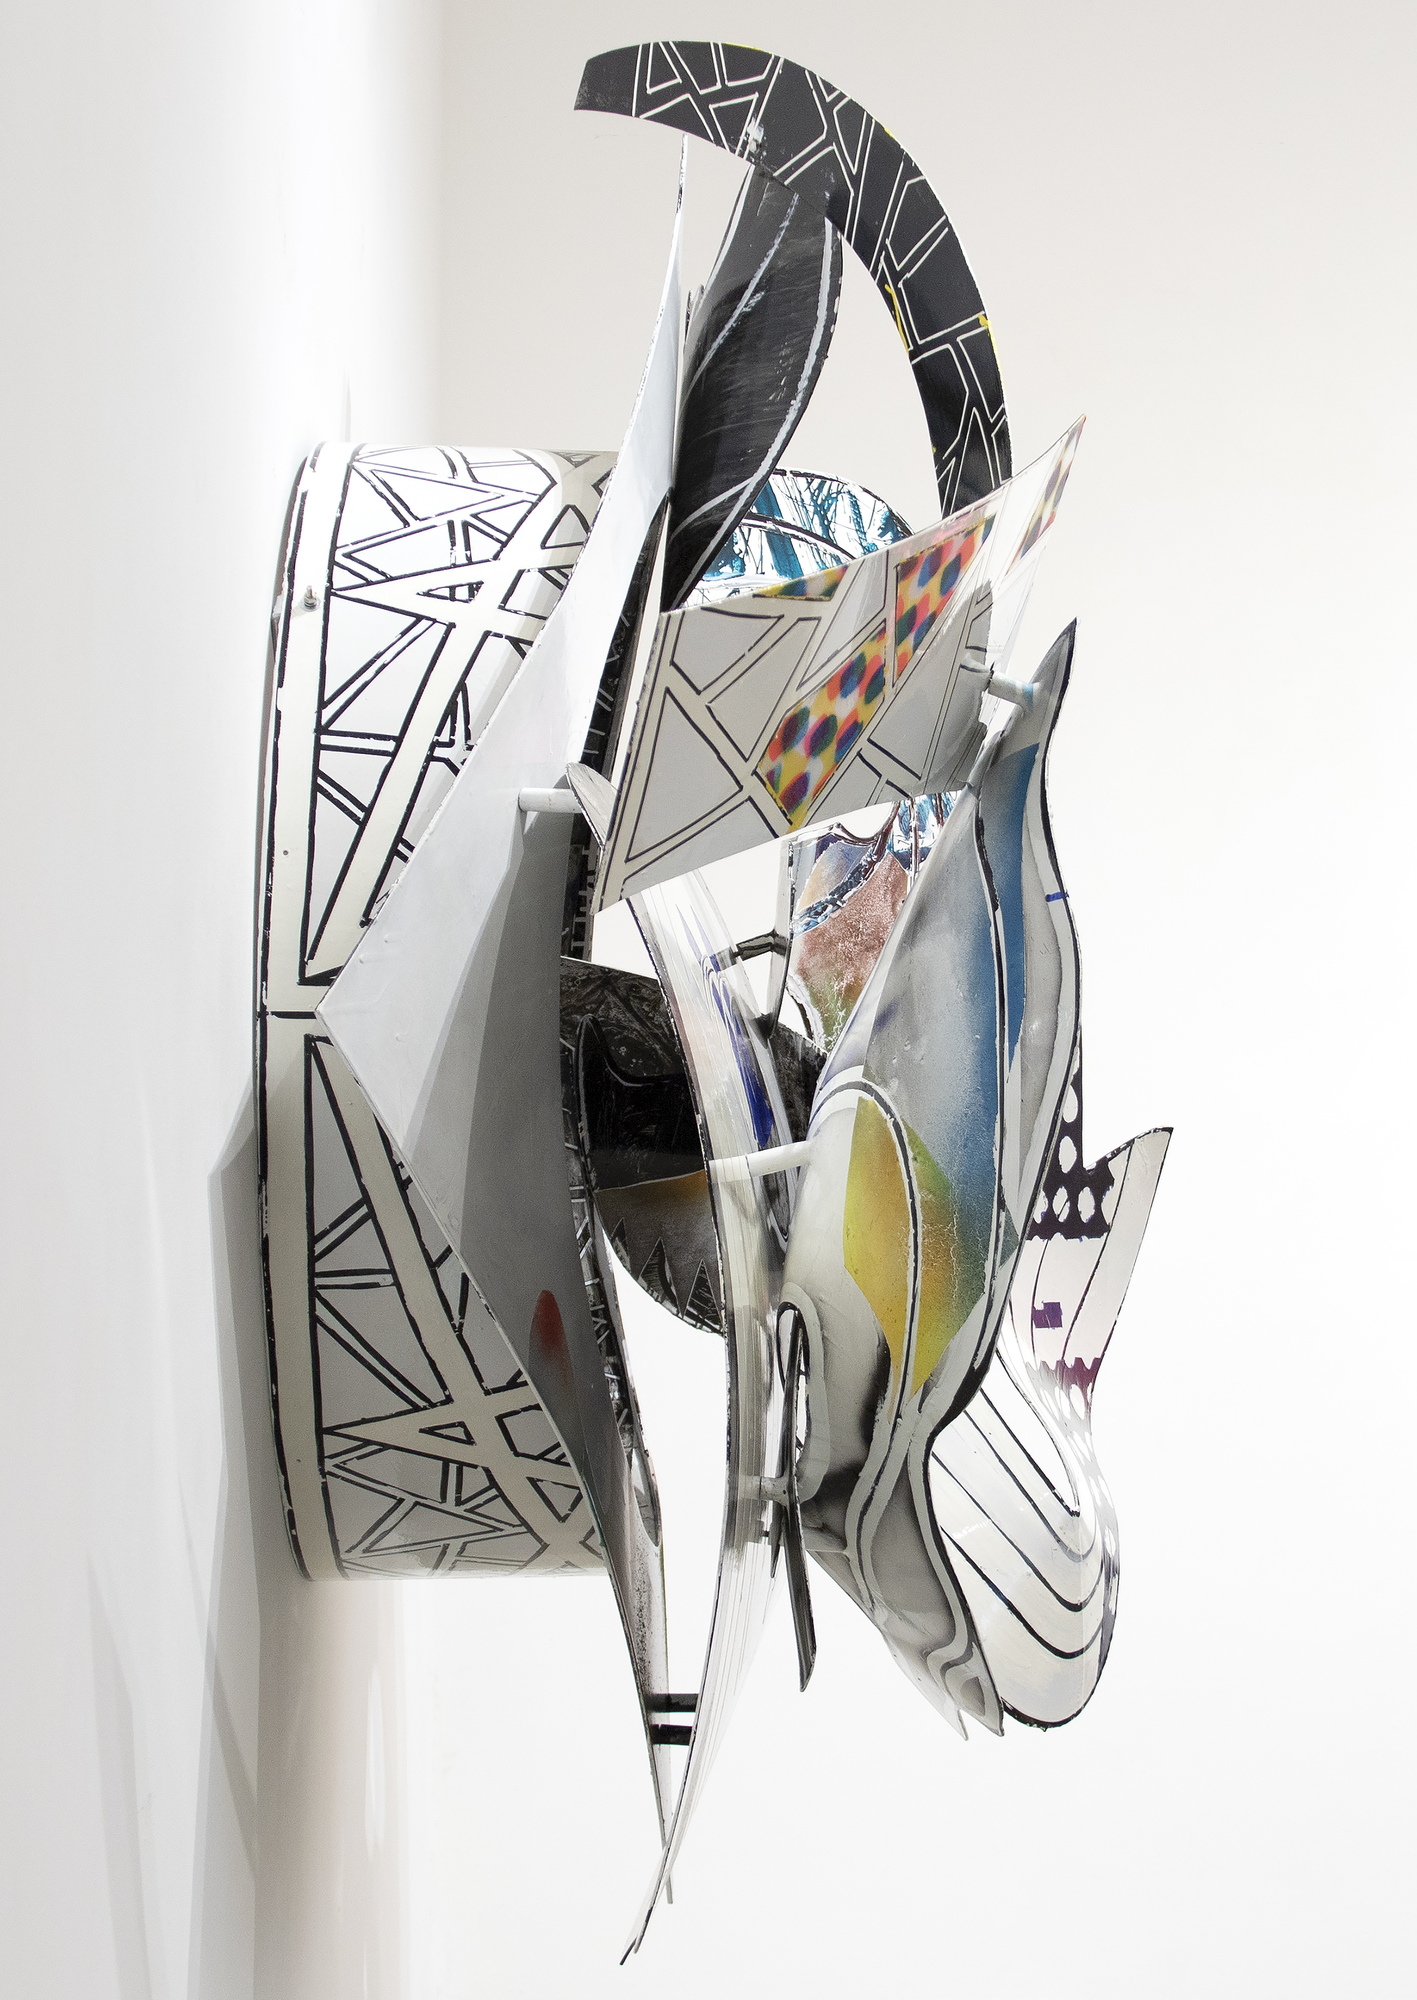 FRANK STELLA - The Musket - mixed media on aluminum - 74 1/2 x 77 1/2 x 33 in.